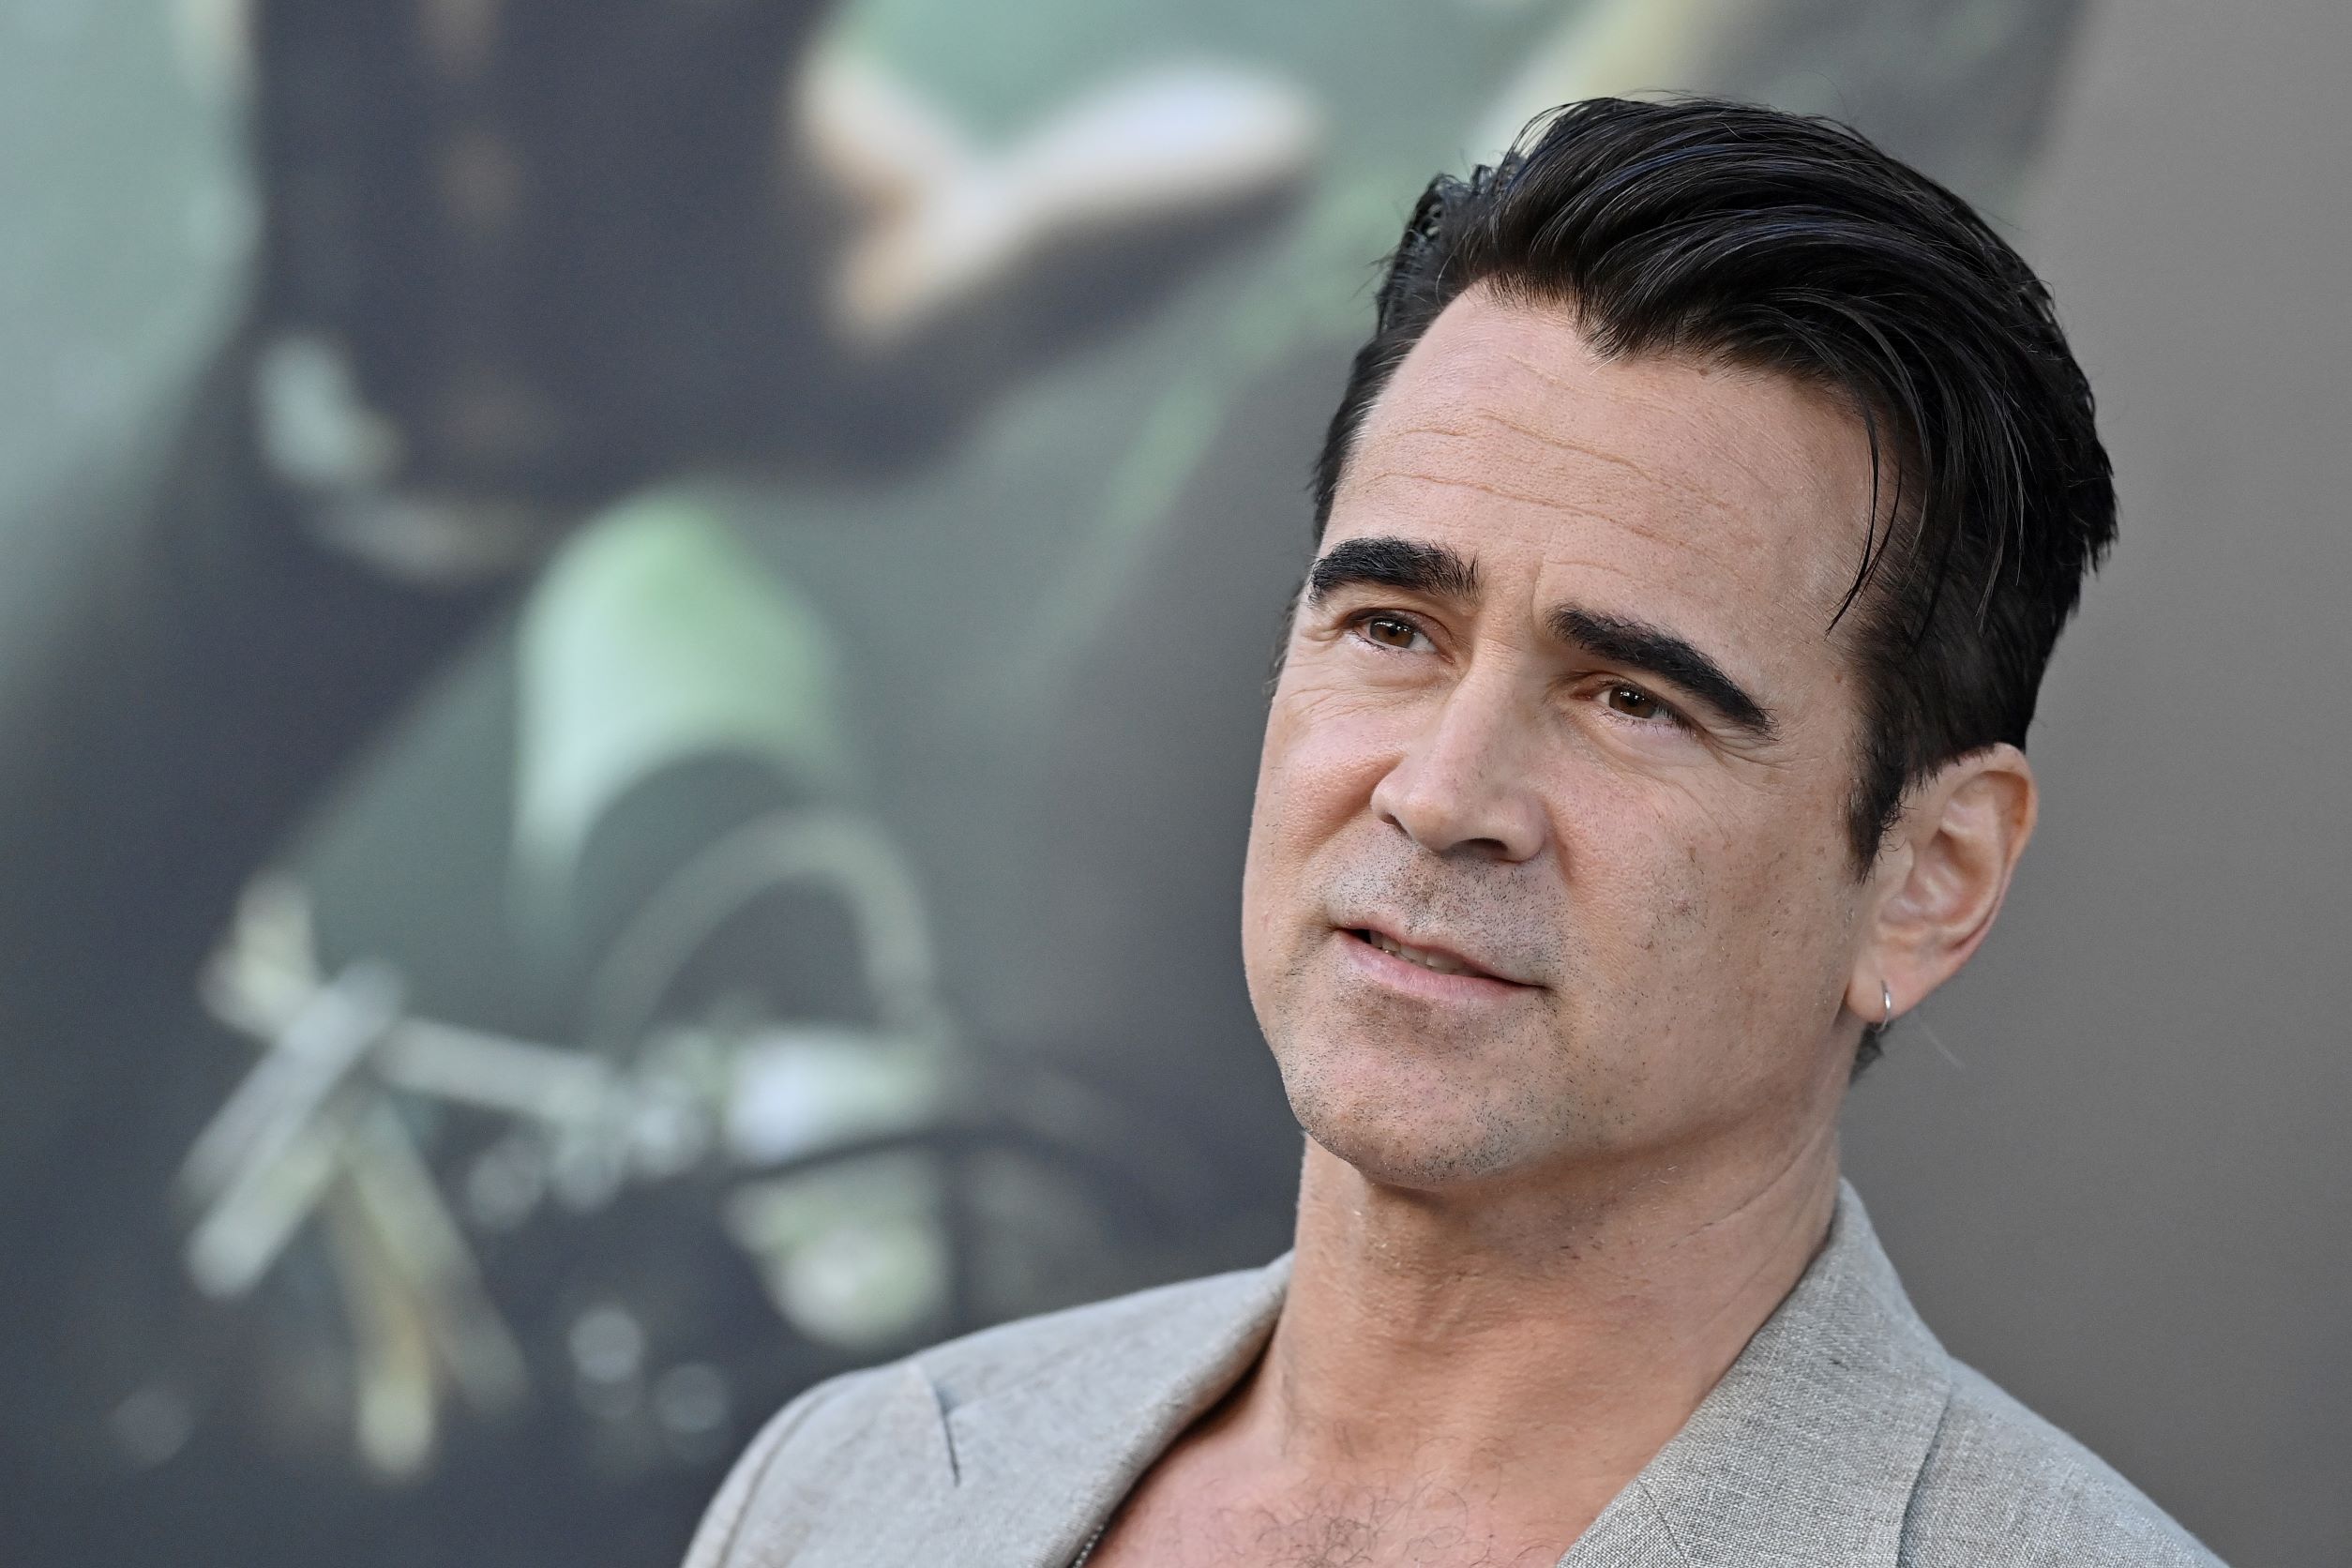 Colin Farrell, who is set to star in 'The Batman' spinoff series on HBO Max, wears a light gray suit.